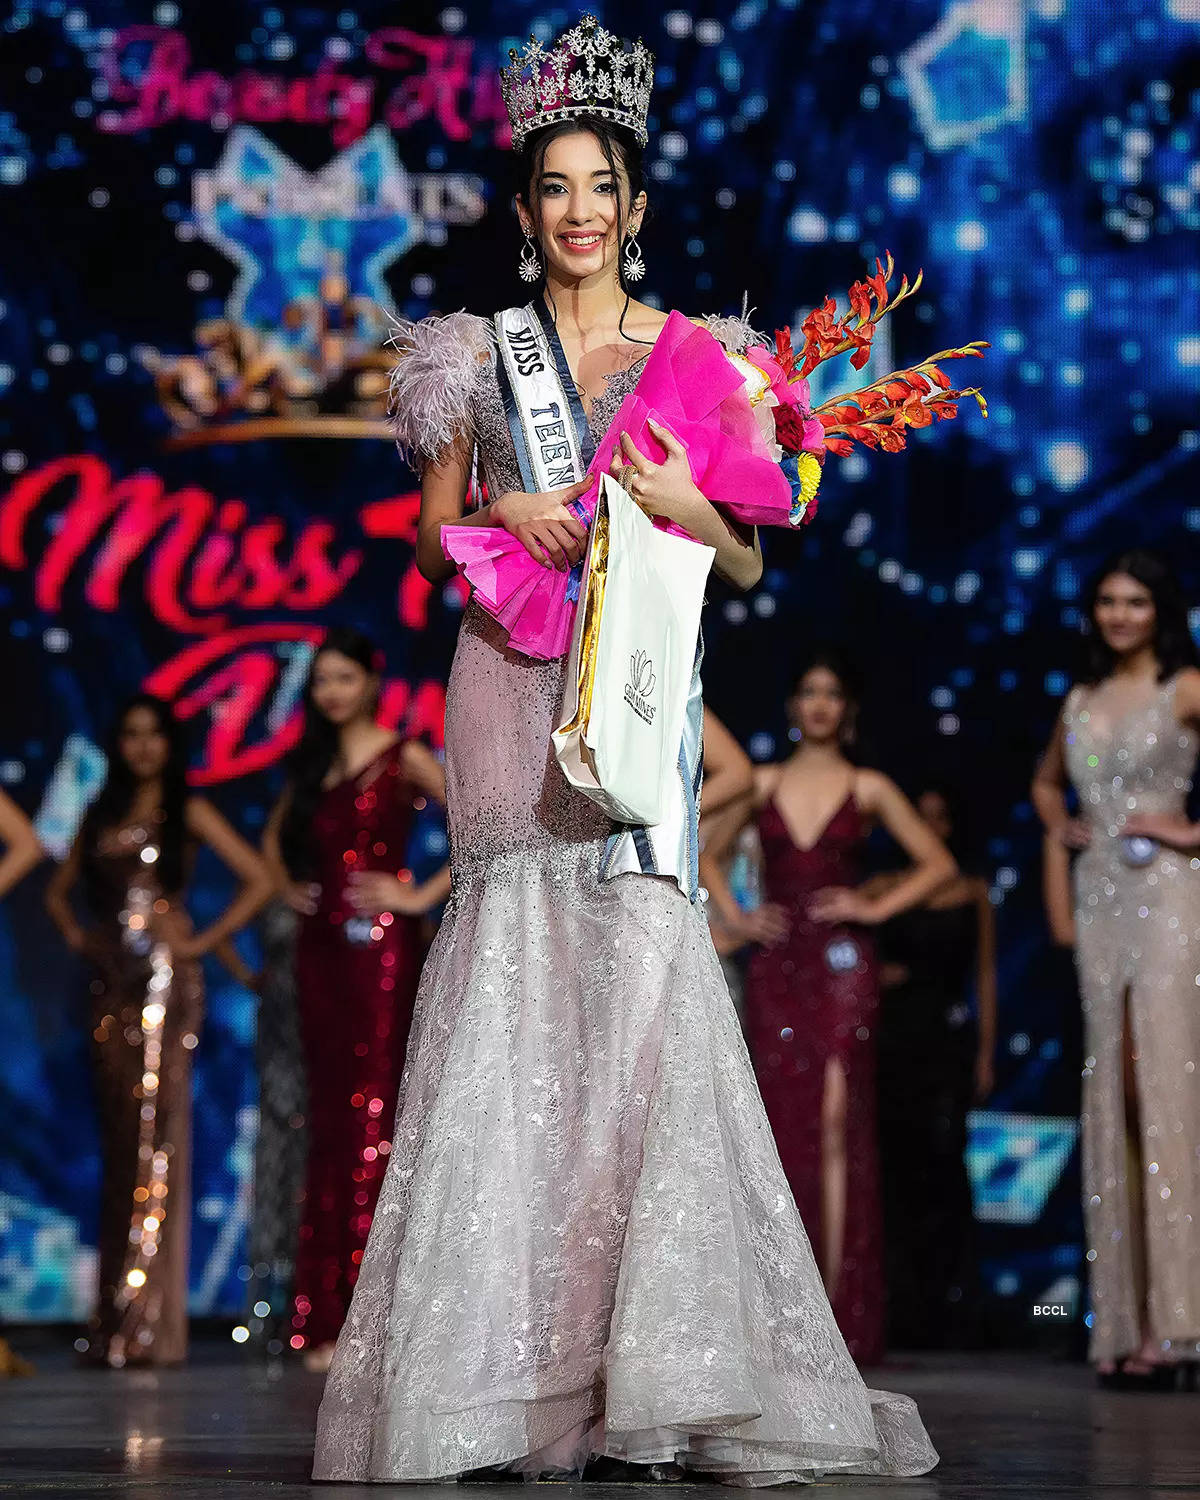 Pictures of Rabia Hora crowned Miss Teen Earth India at Miss Teen Diva 2021